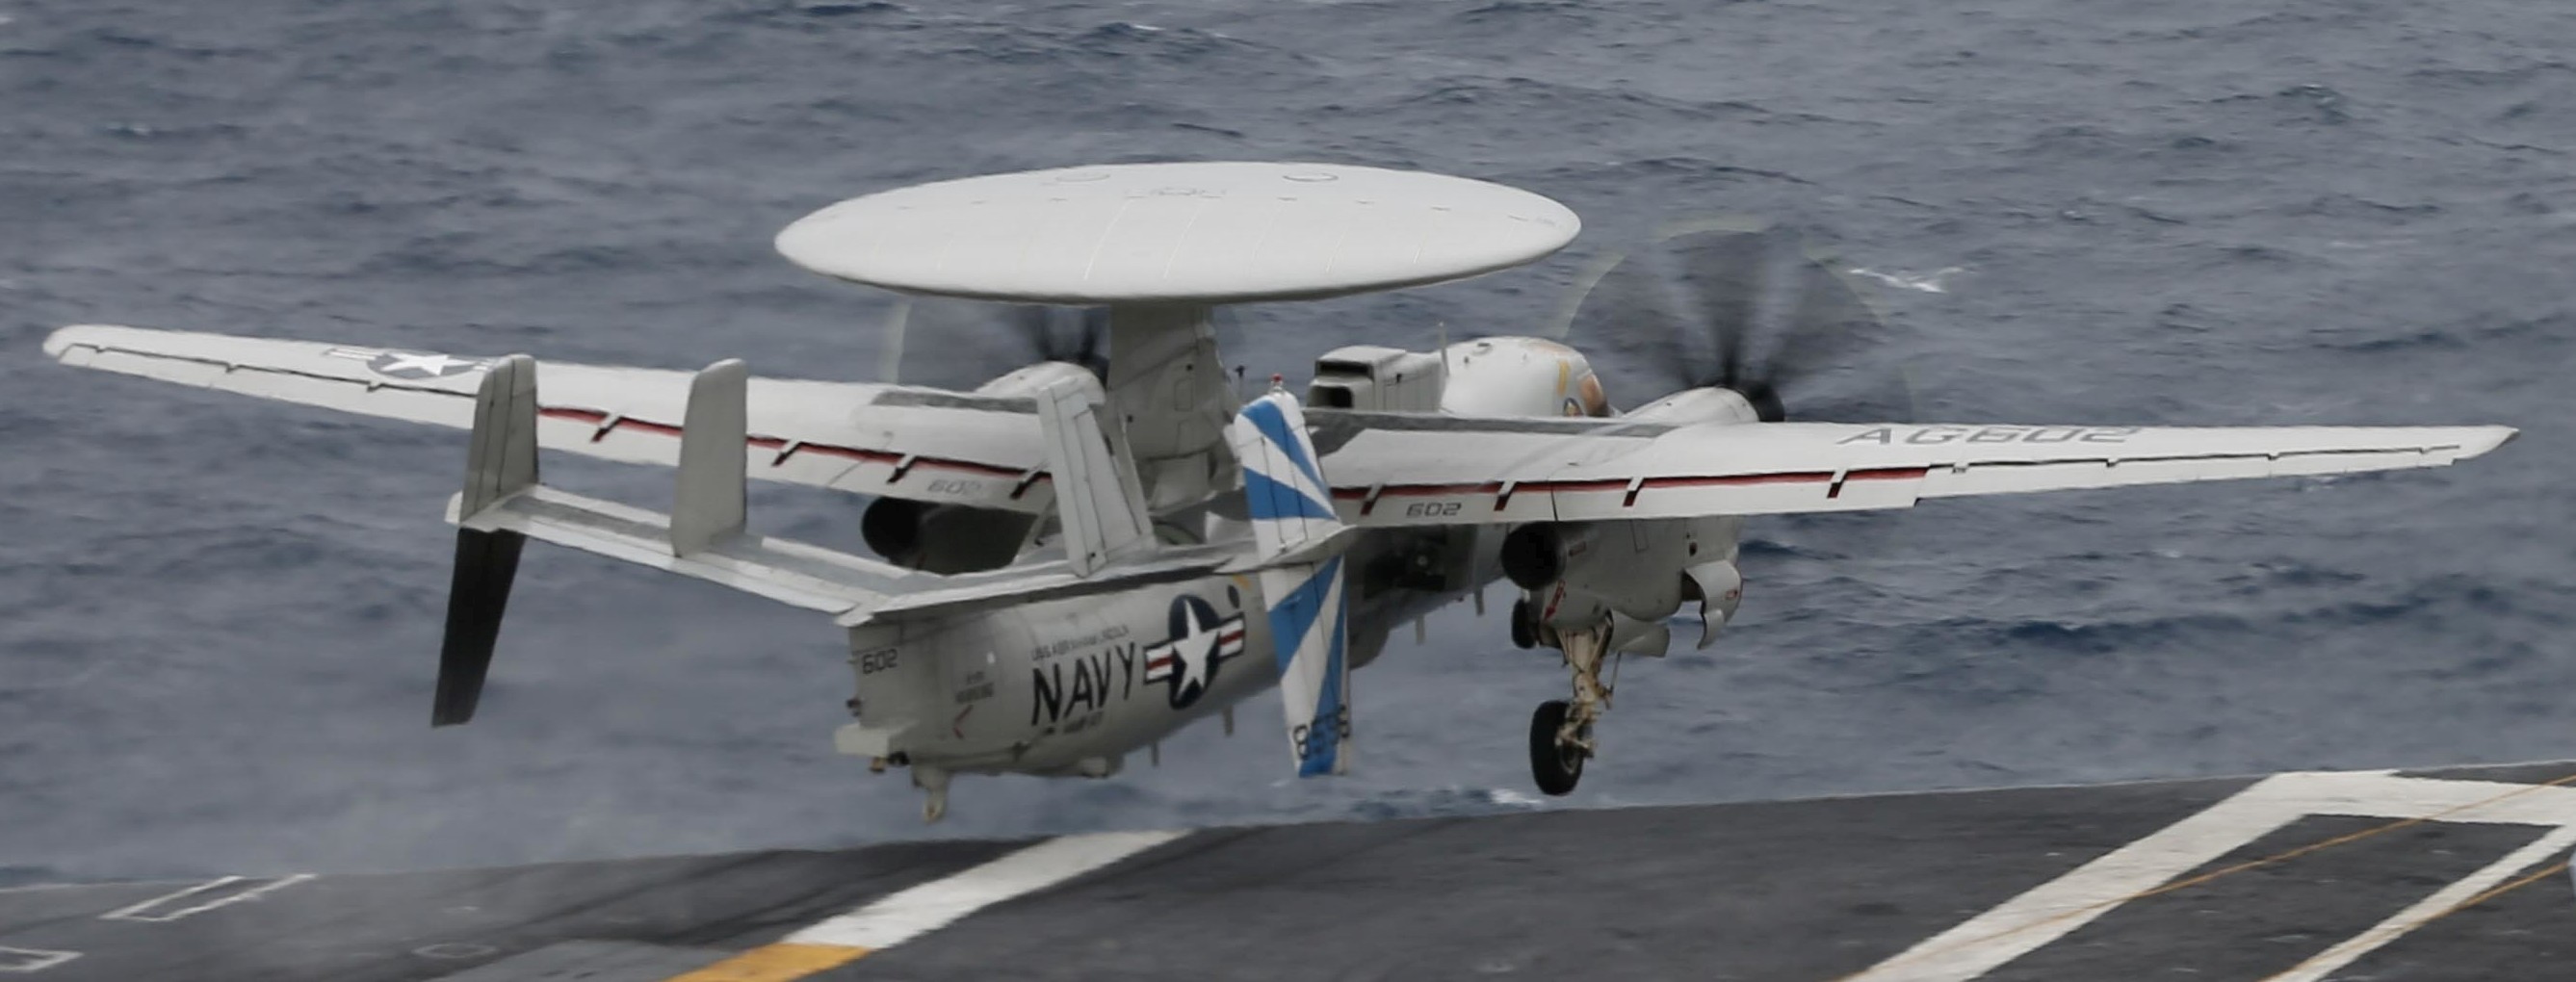 vaw-121 bluetails airborne command and control squadron us navy e-2d advanced hawkeye cvw-7 uss abraham lincoln cvn-72 63